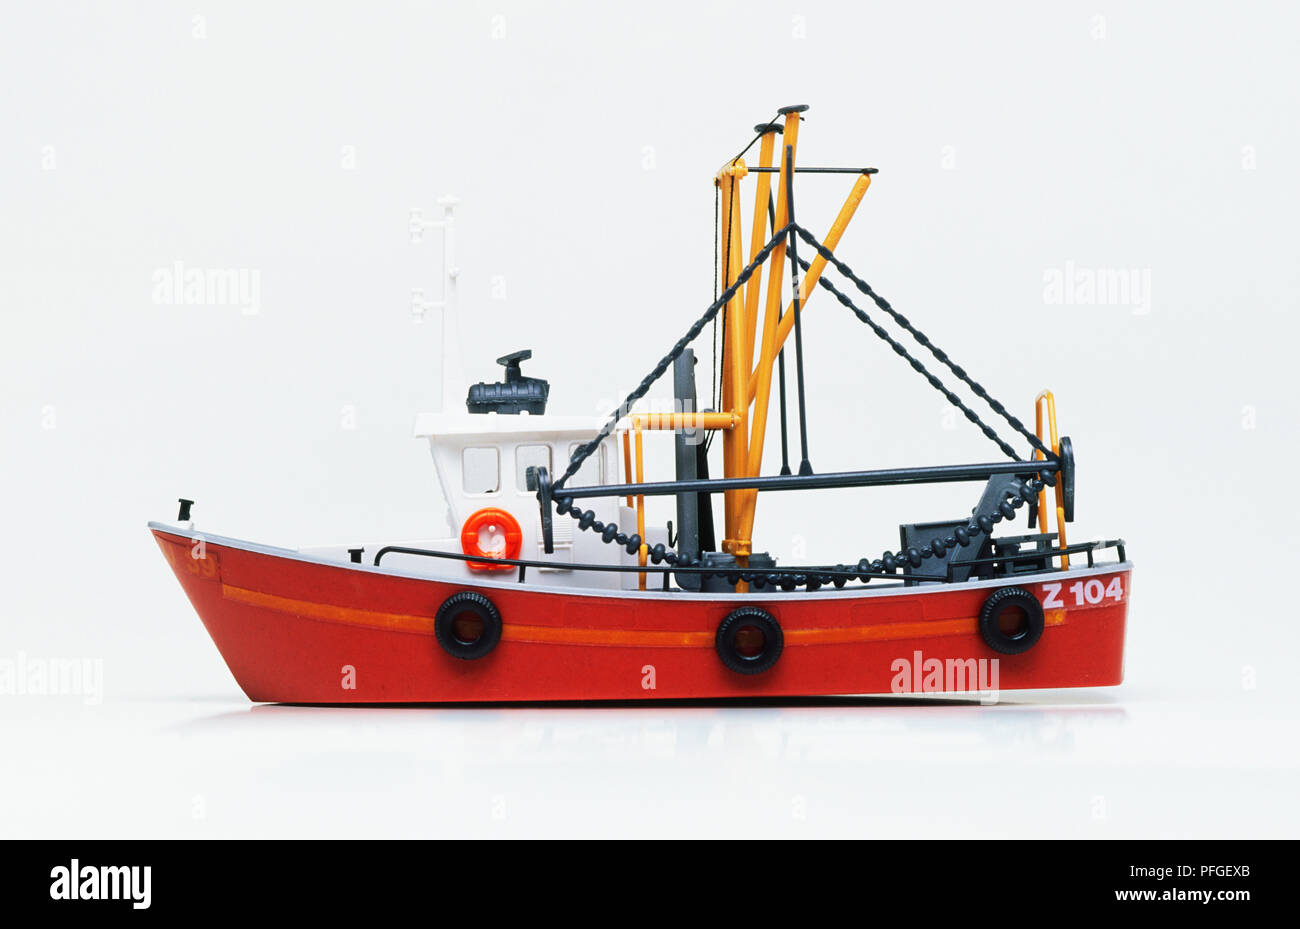 Small fishing boats with fishing net and equipment, motor boat or